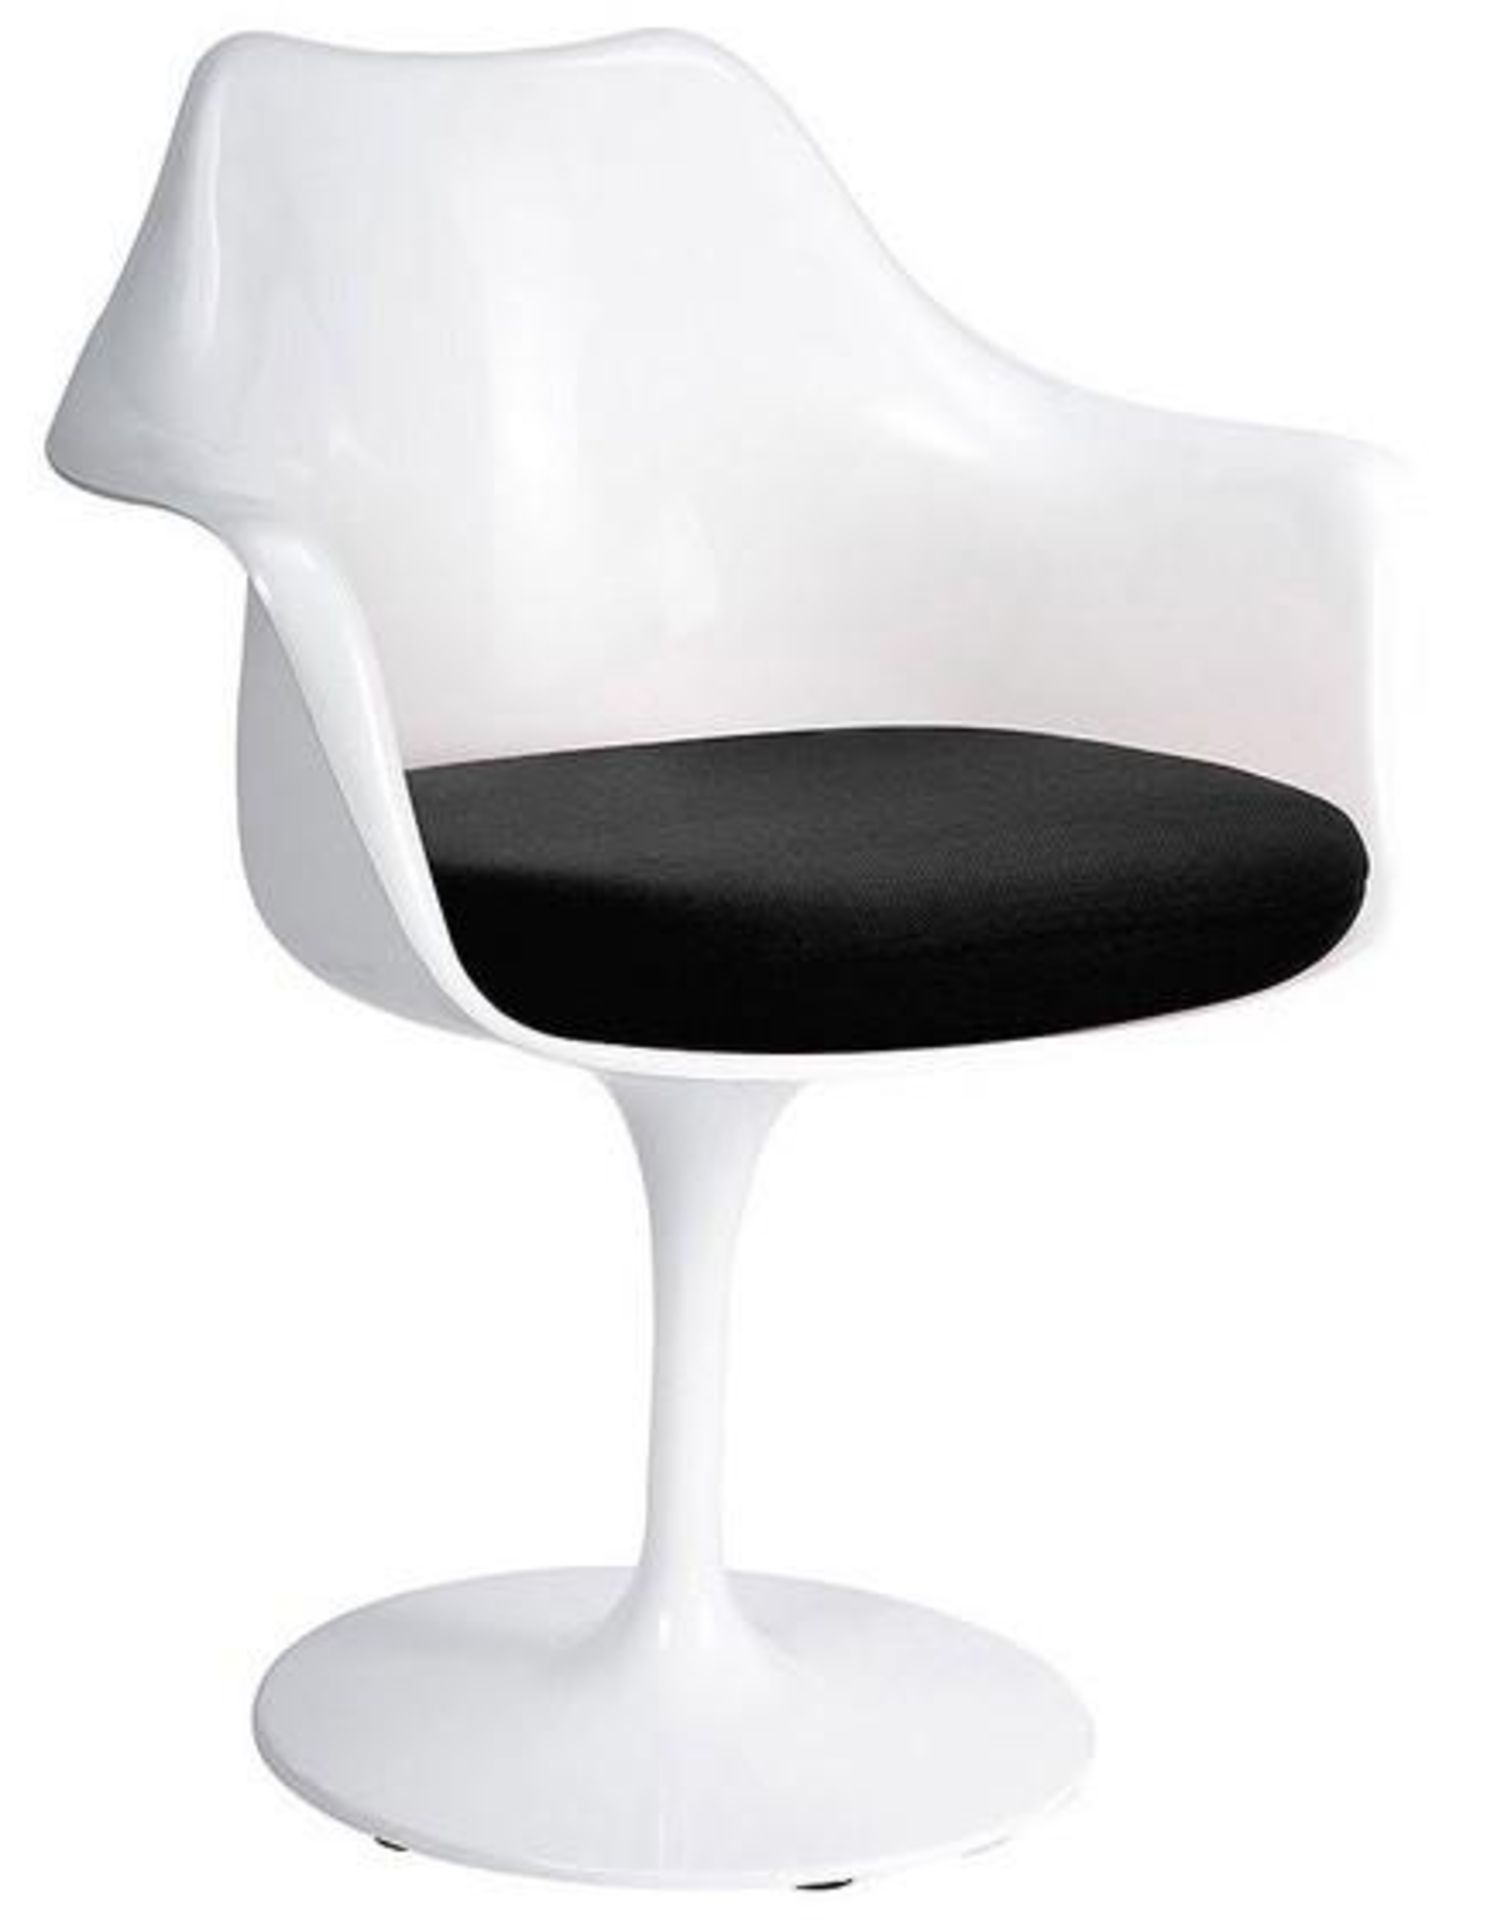 1 x Eero Saarinen Inspired Tulip Armchair In White With A Black Fabri Cushion - Brand New Boxed Stoc